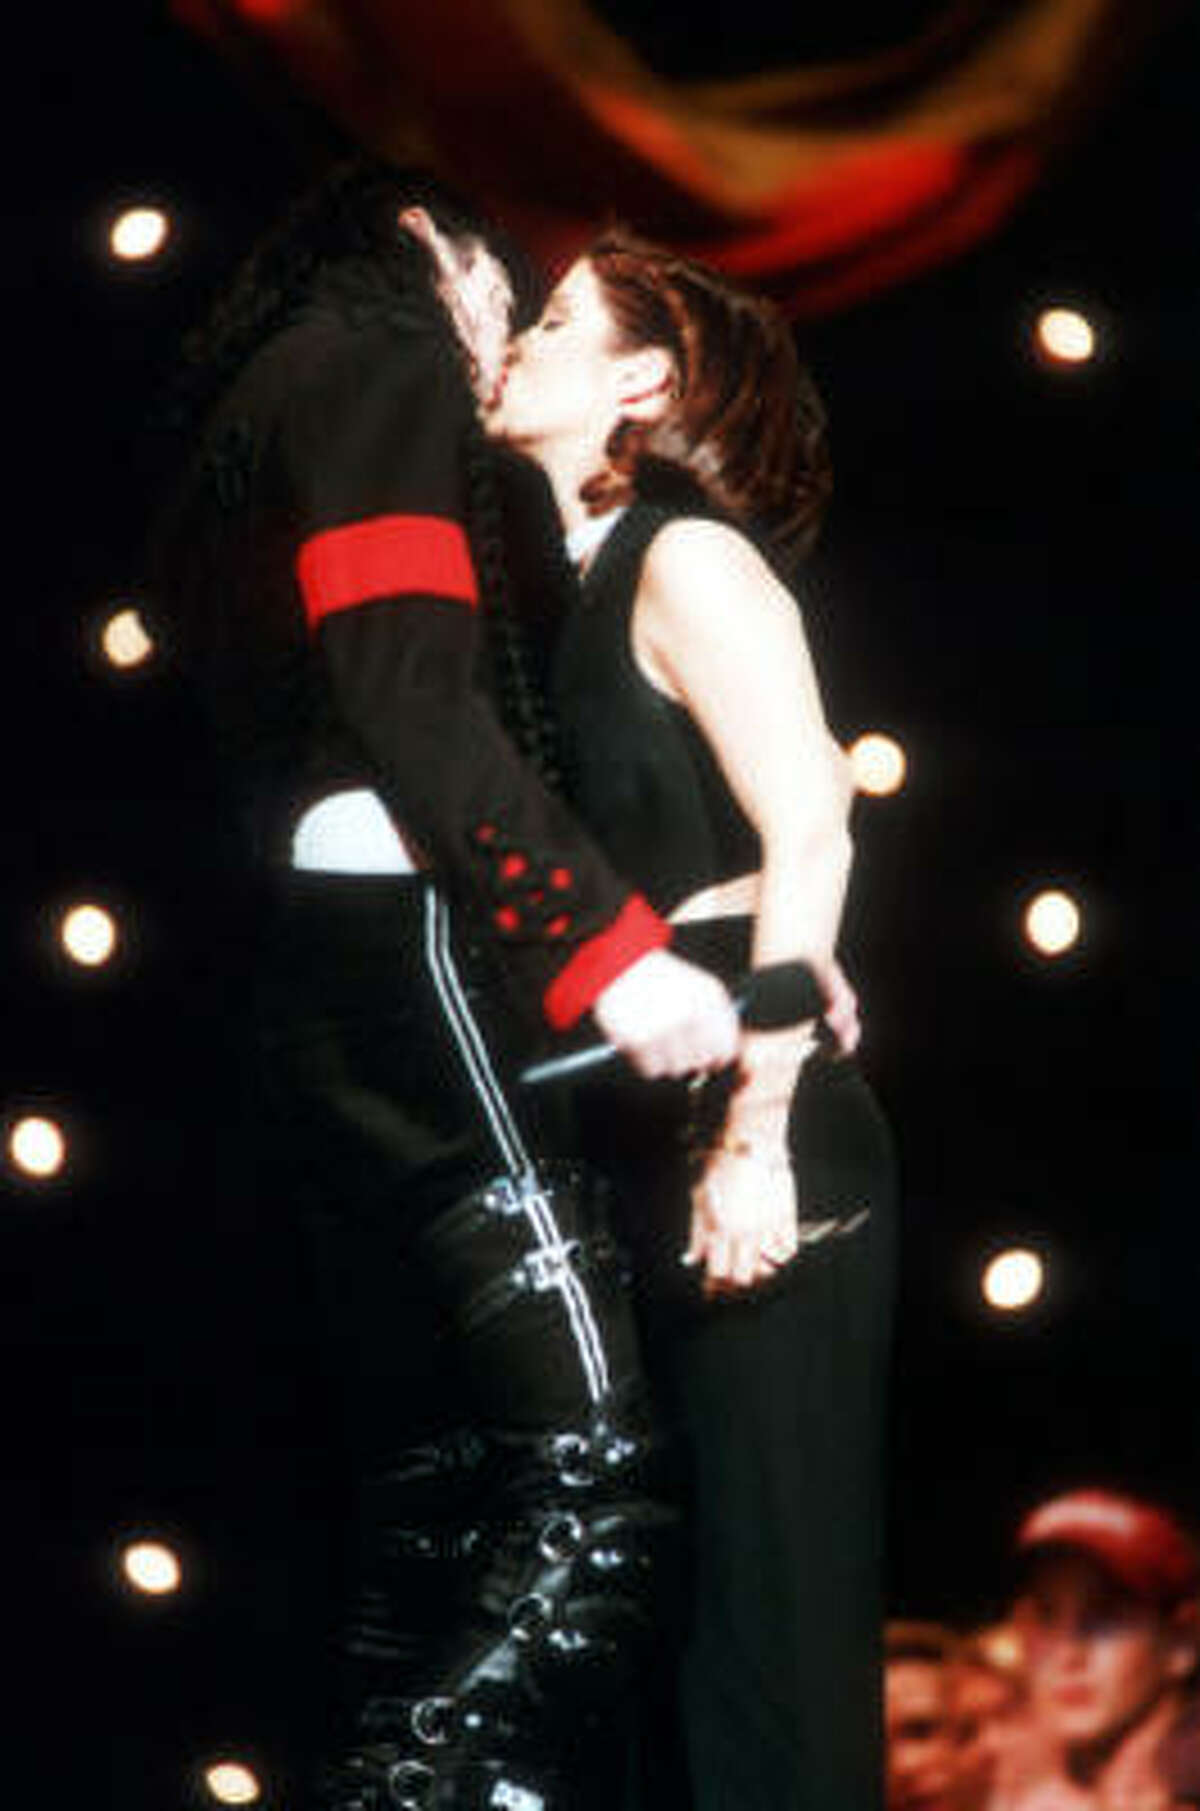 Or it can be to prove a point. Such as the "we're so in love" kiss between Michael Jackson and Lisa Marie Presley-Jackson after they opened the 11th annual MTV Video Music Awards.